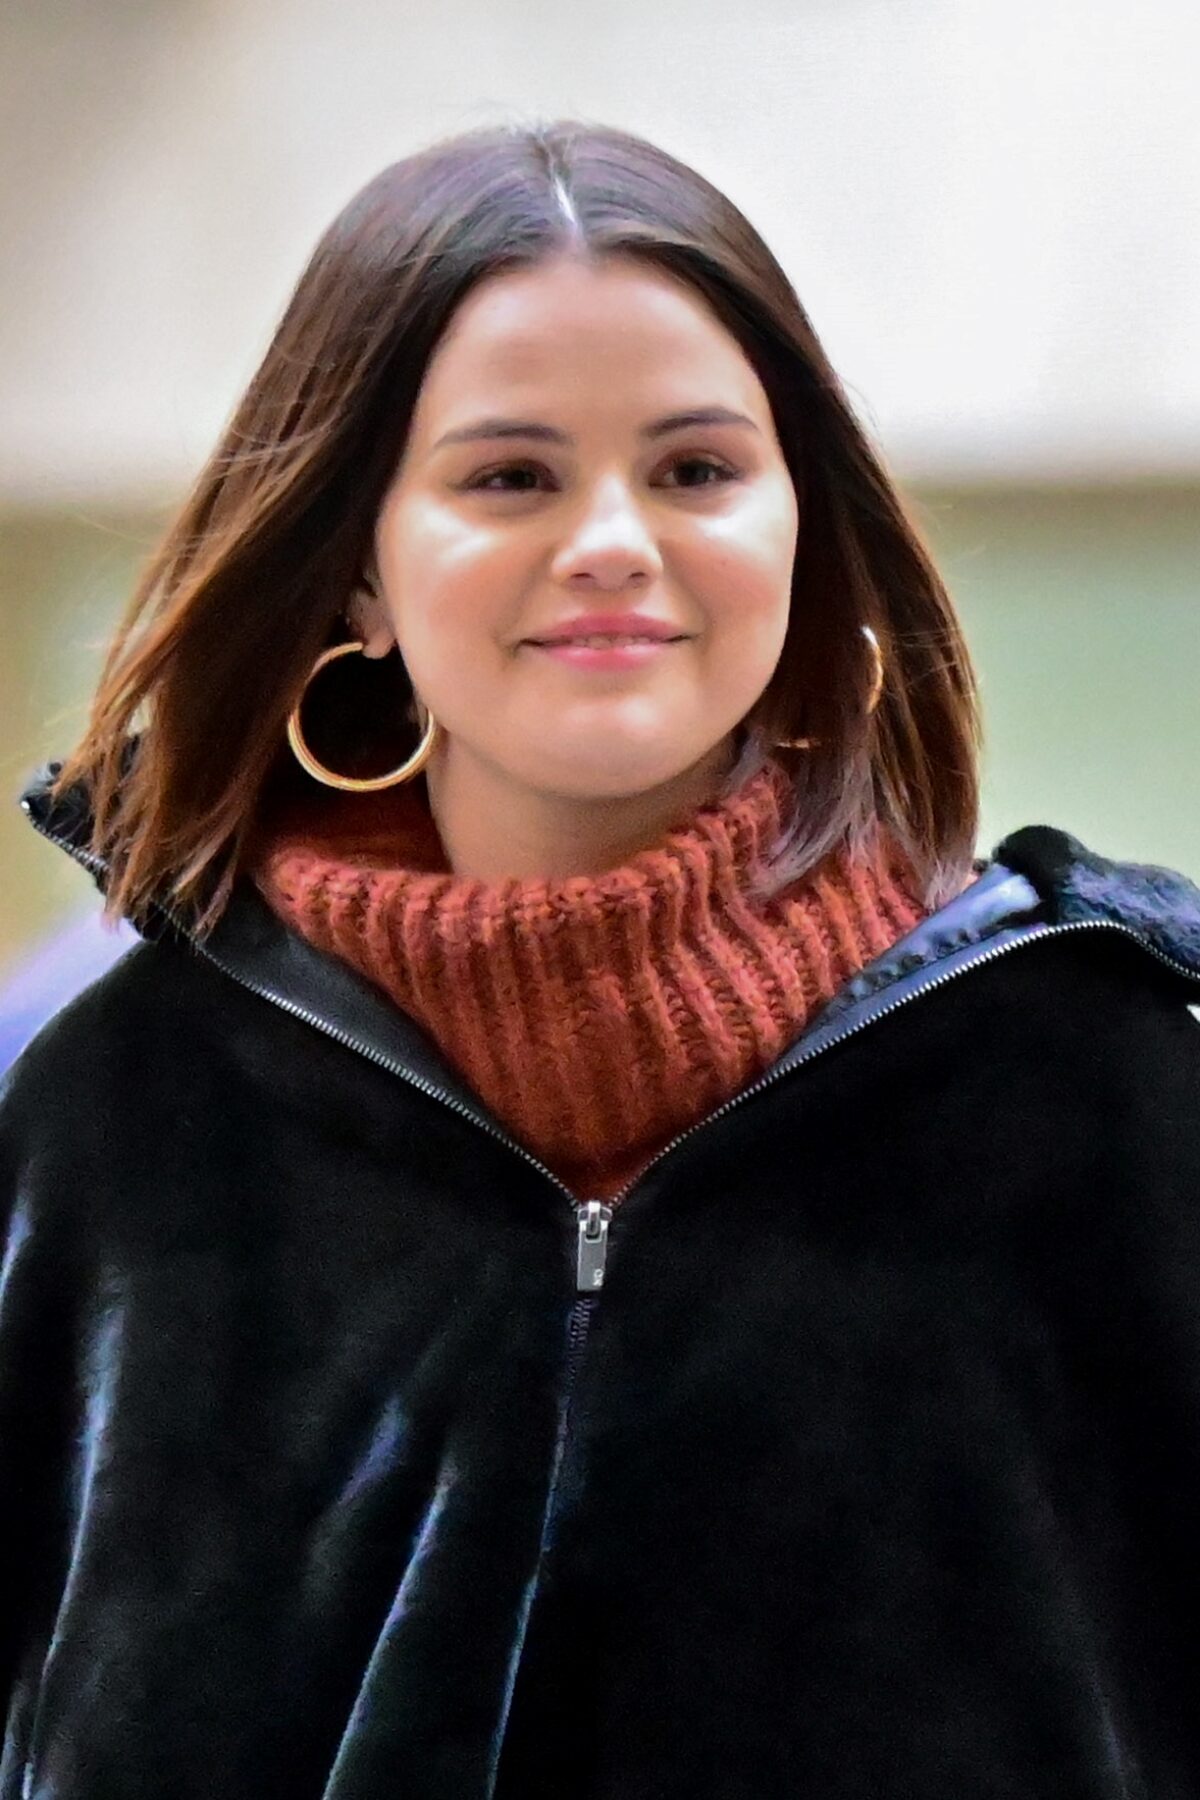 Selena Gomez is seen on the set of 'Only Murders in the Building' on the Upper West Side on December 07, 2021 in New York City. (Photo by James Devaney/GC Images)